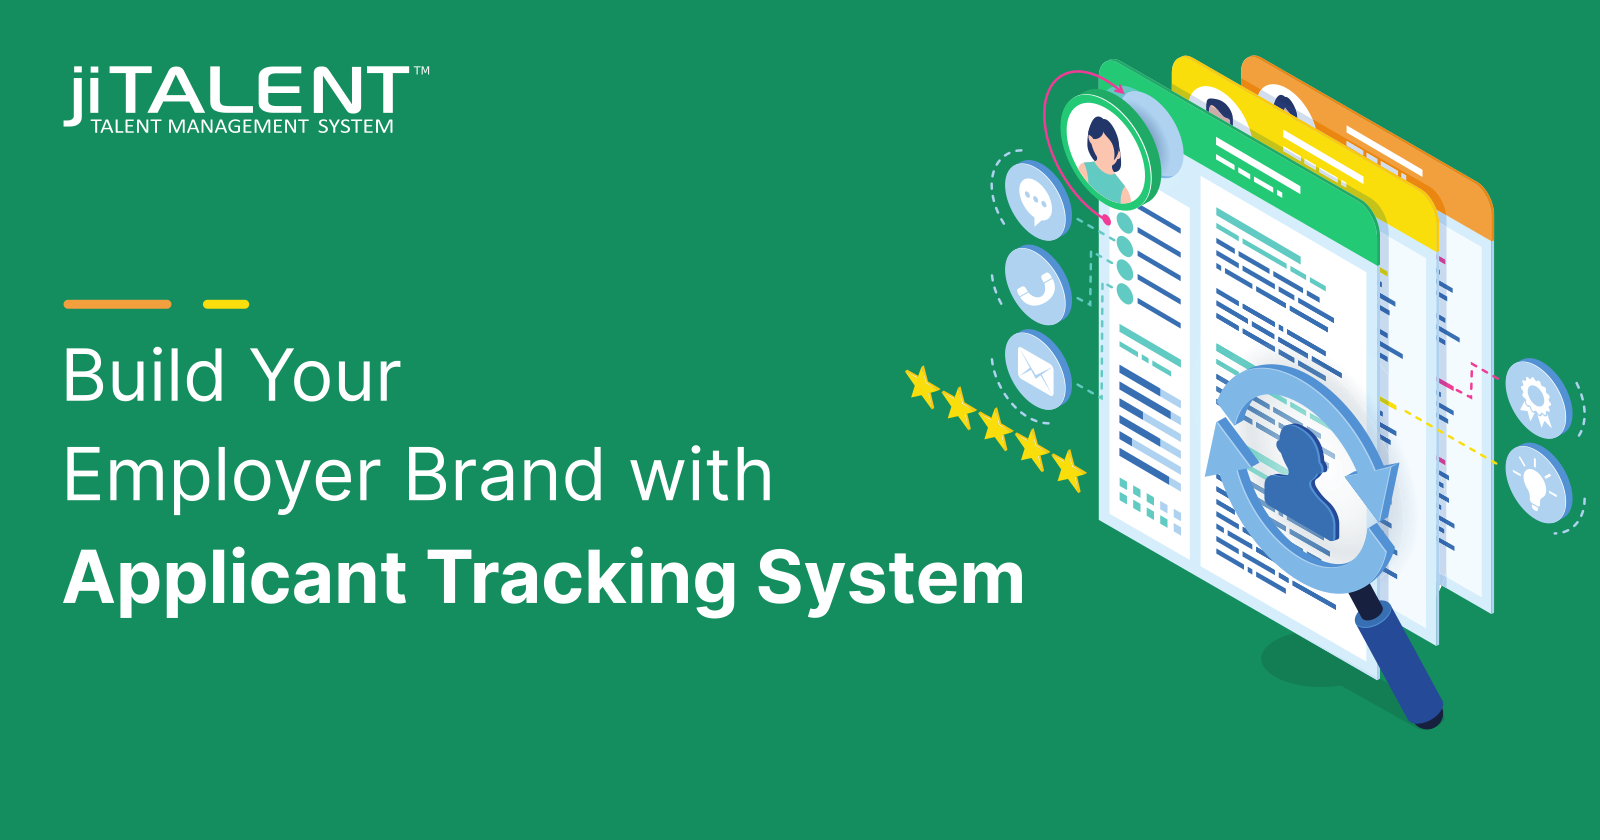 Build Your Employer Brand with Applicant Tracking System